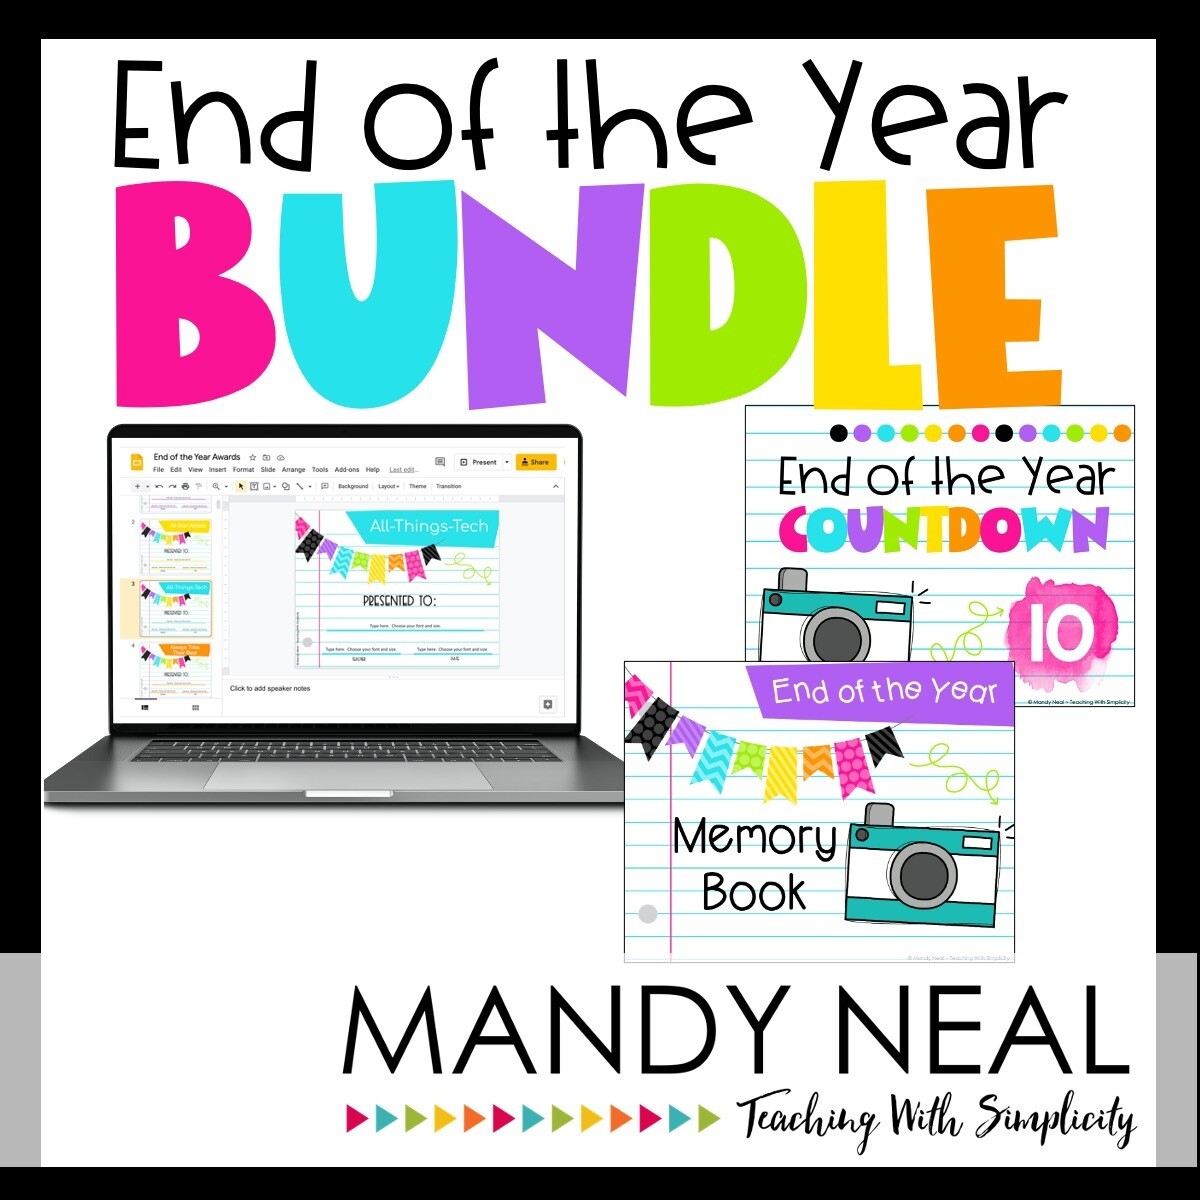 End of the Year Activities, Awards, and Memory Book Bundle